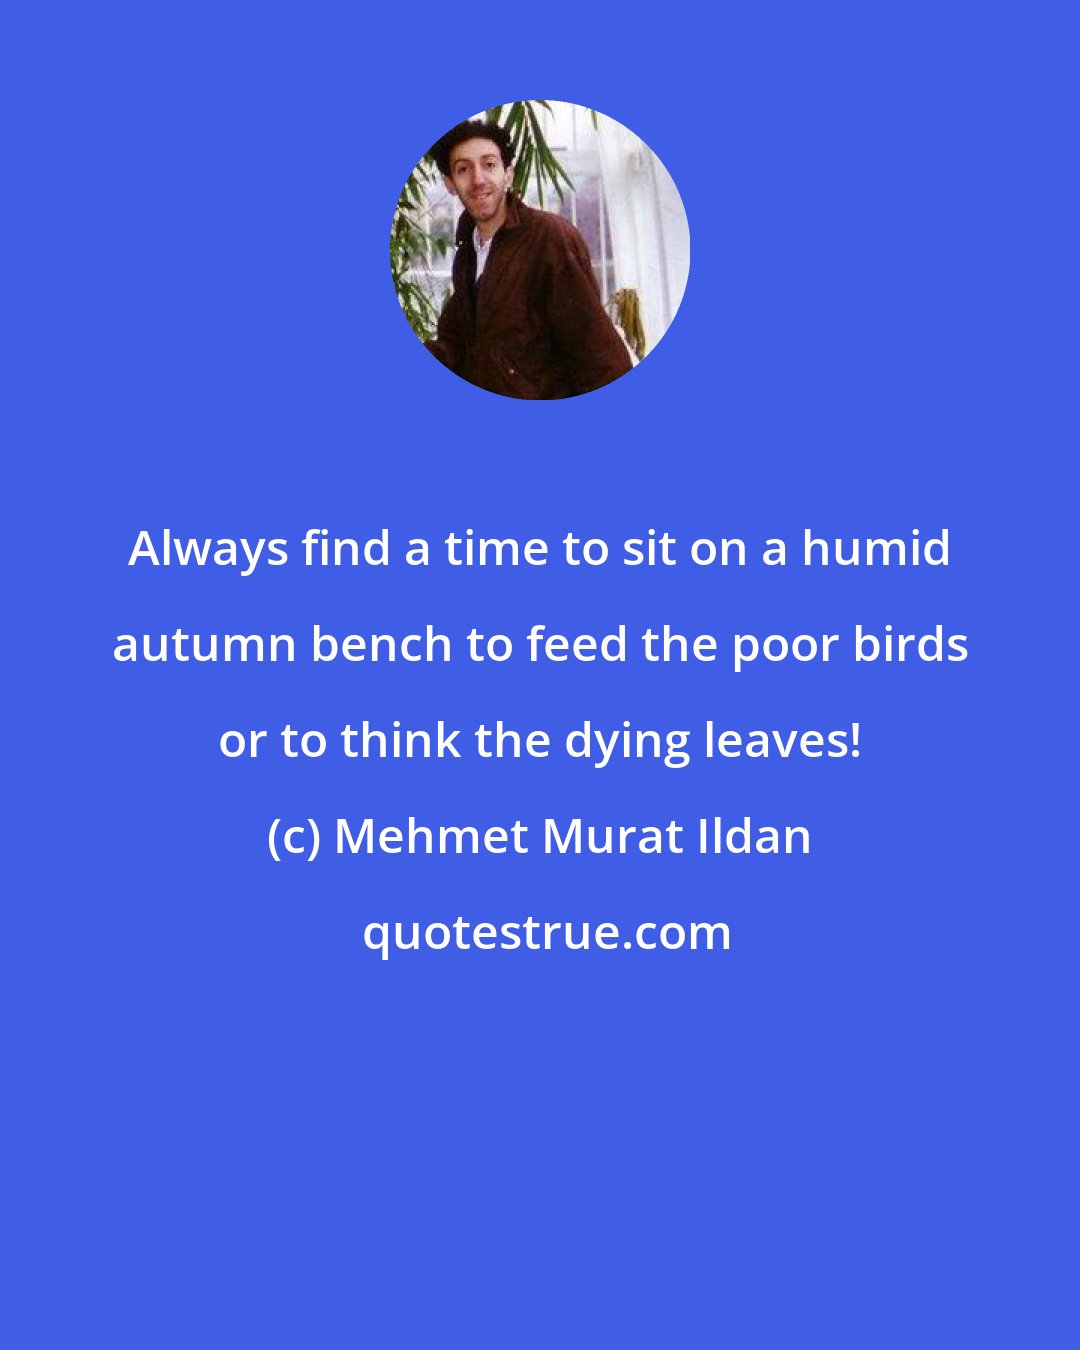 Mehmet Murat Ildan: Always find a time to sit on a humid autumn bench to feed the poor birds or to think the dying leaves!